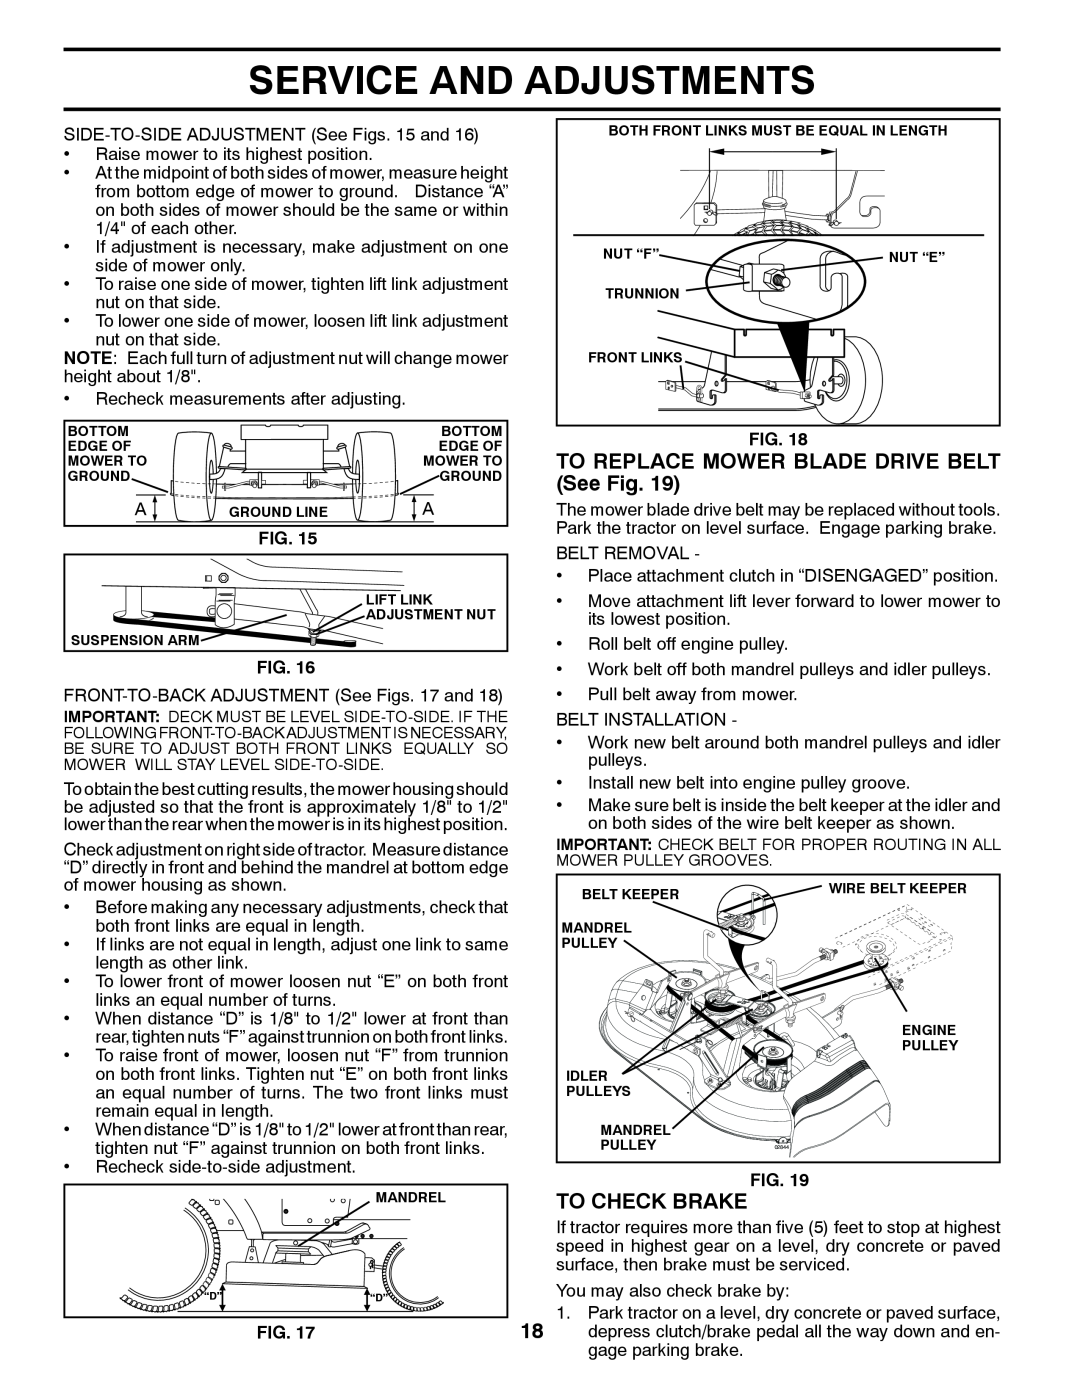 Poulan 431147, 96016002200, PXT12538 TO REPLACE MOWER BLADE DRIVE BELT See Fig, To Check Brake, Service And Adjustments 